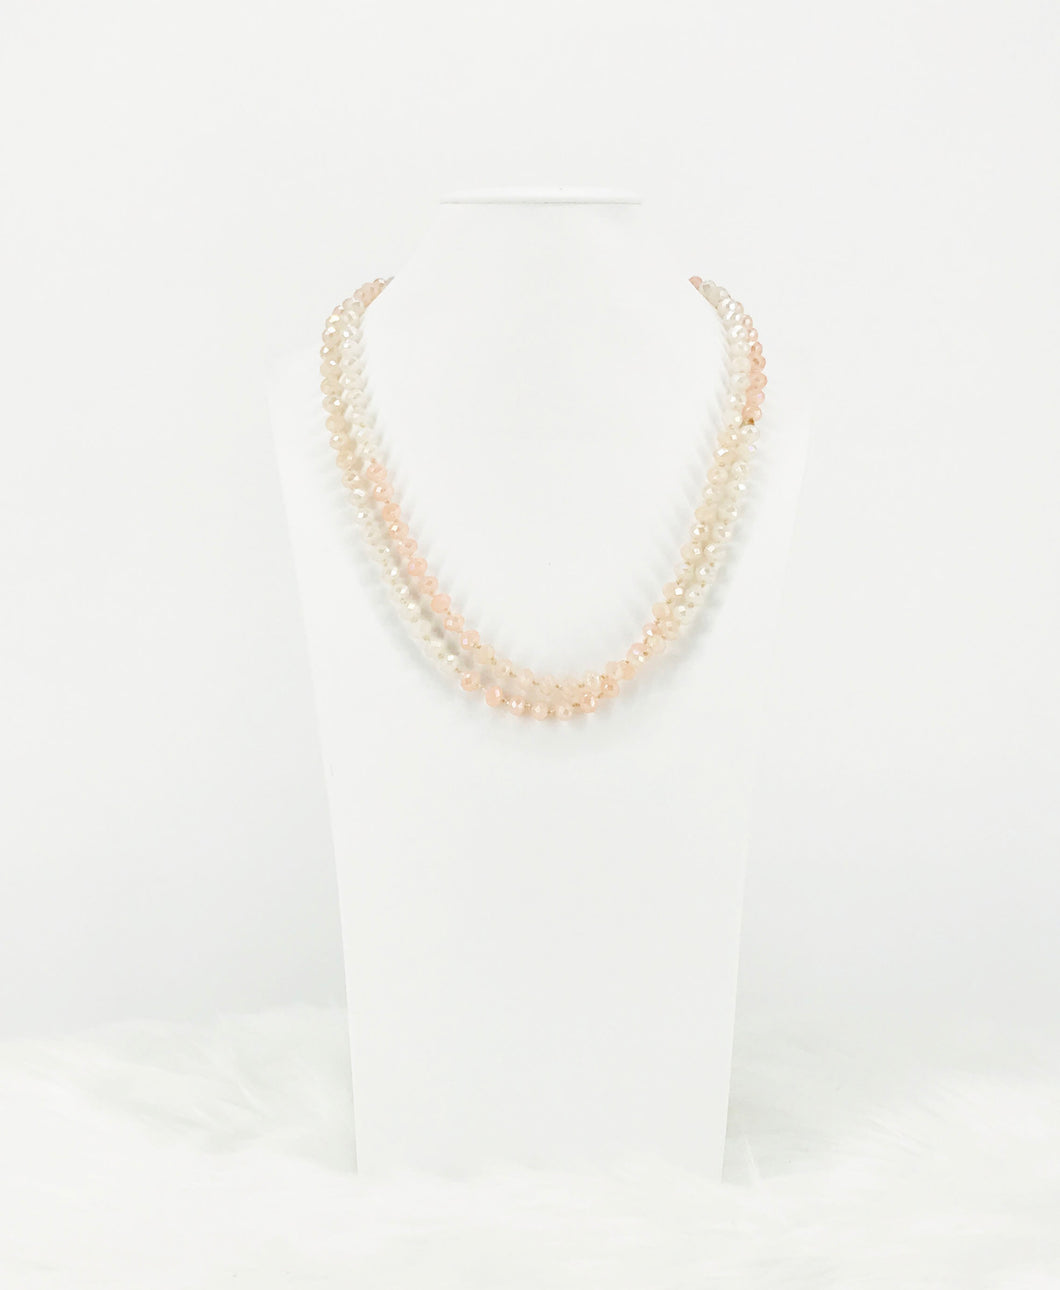 Pink and Cream Ombre' Knotted Glass Bead Necklace - N331